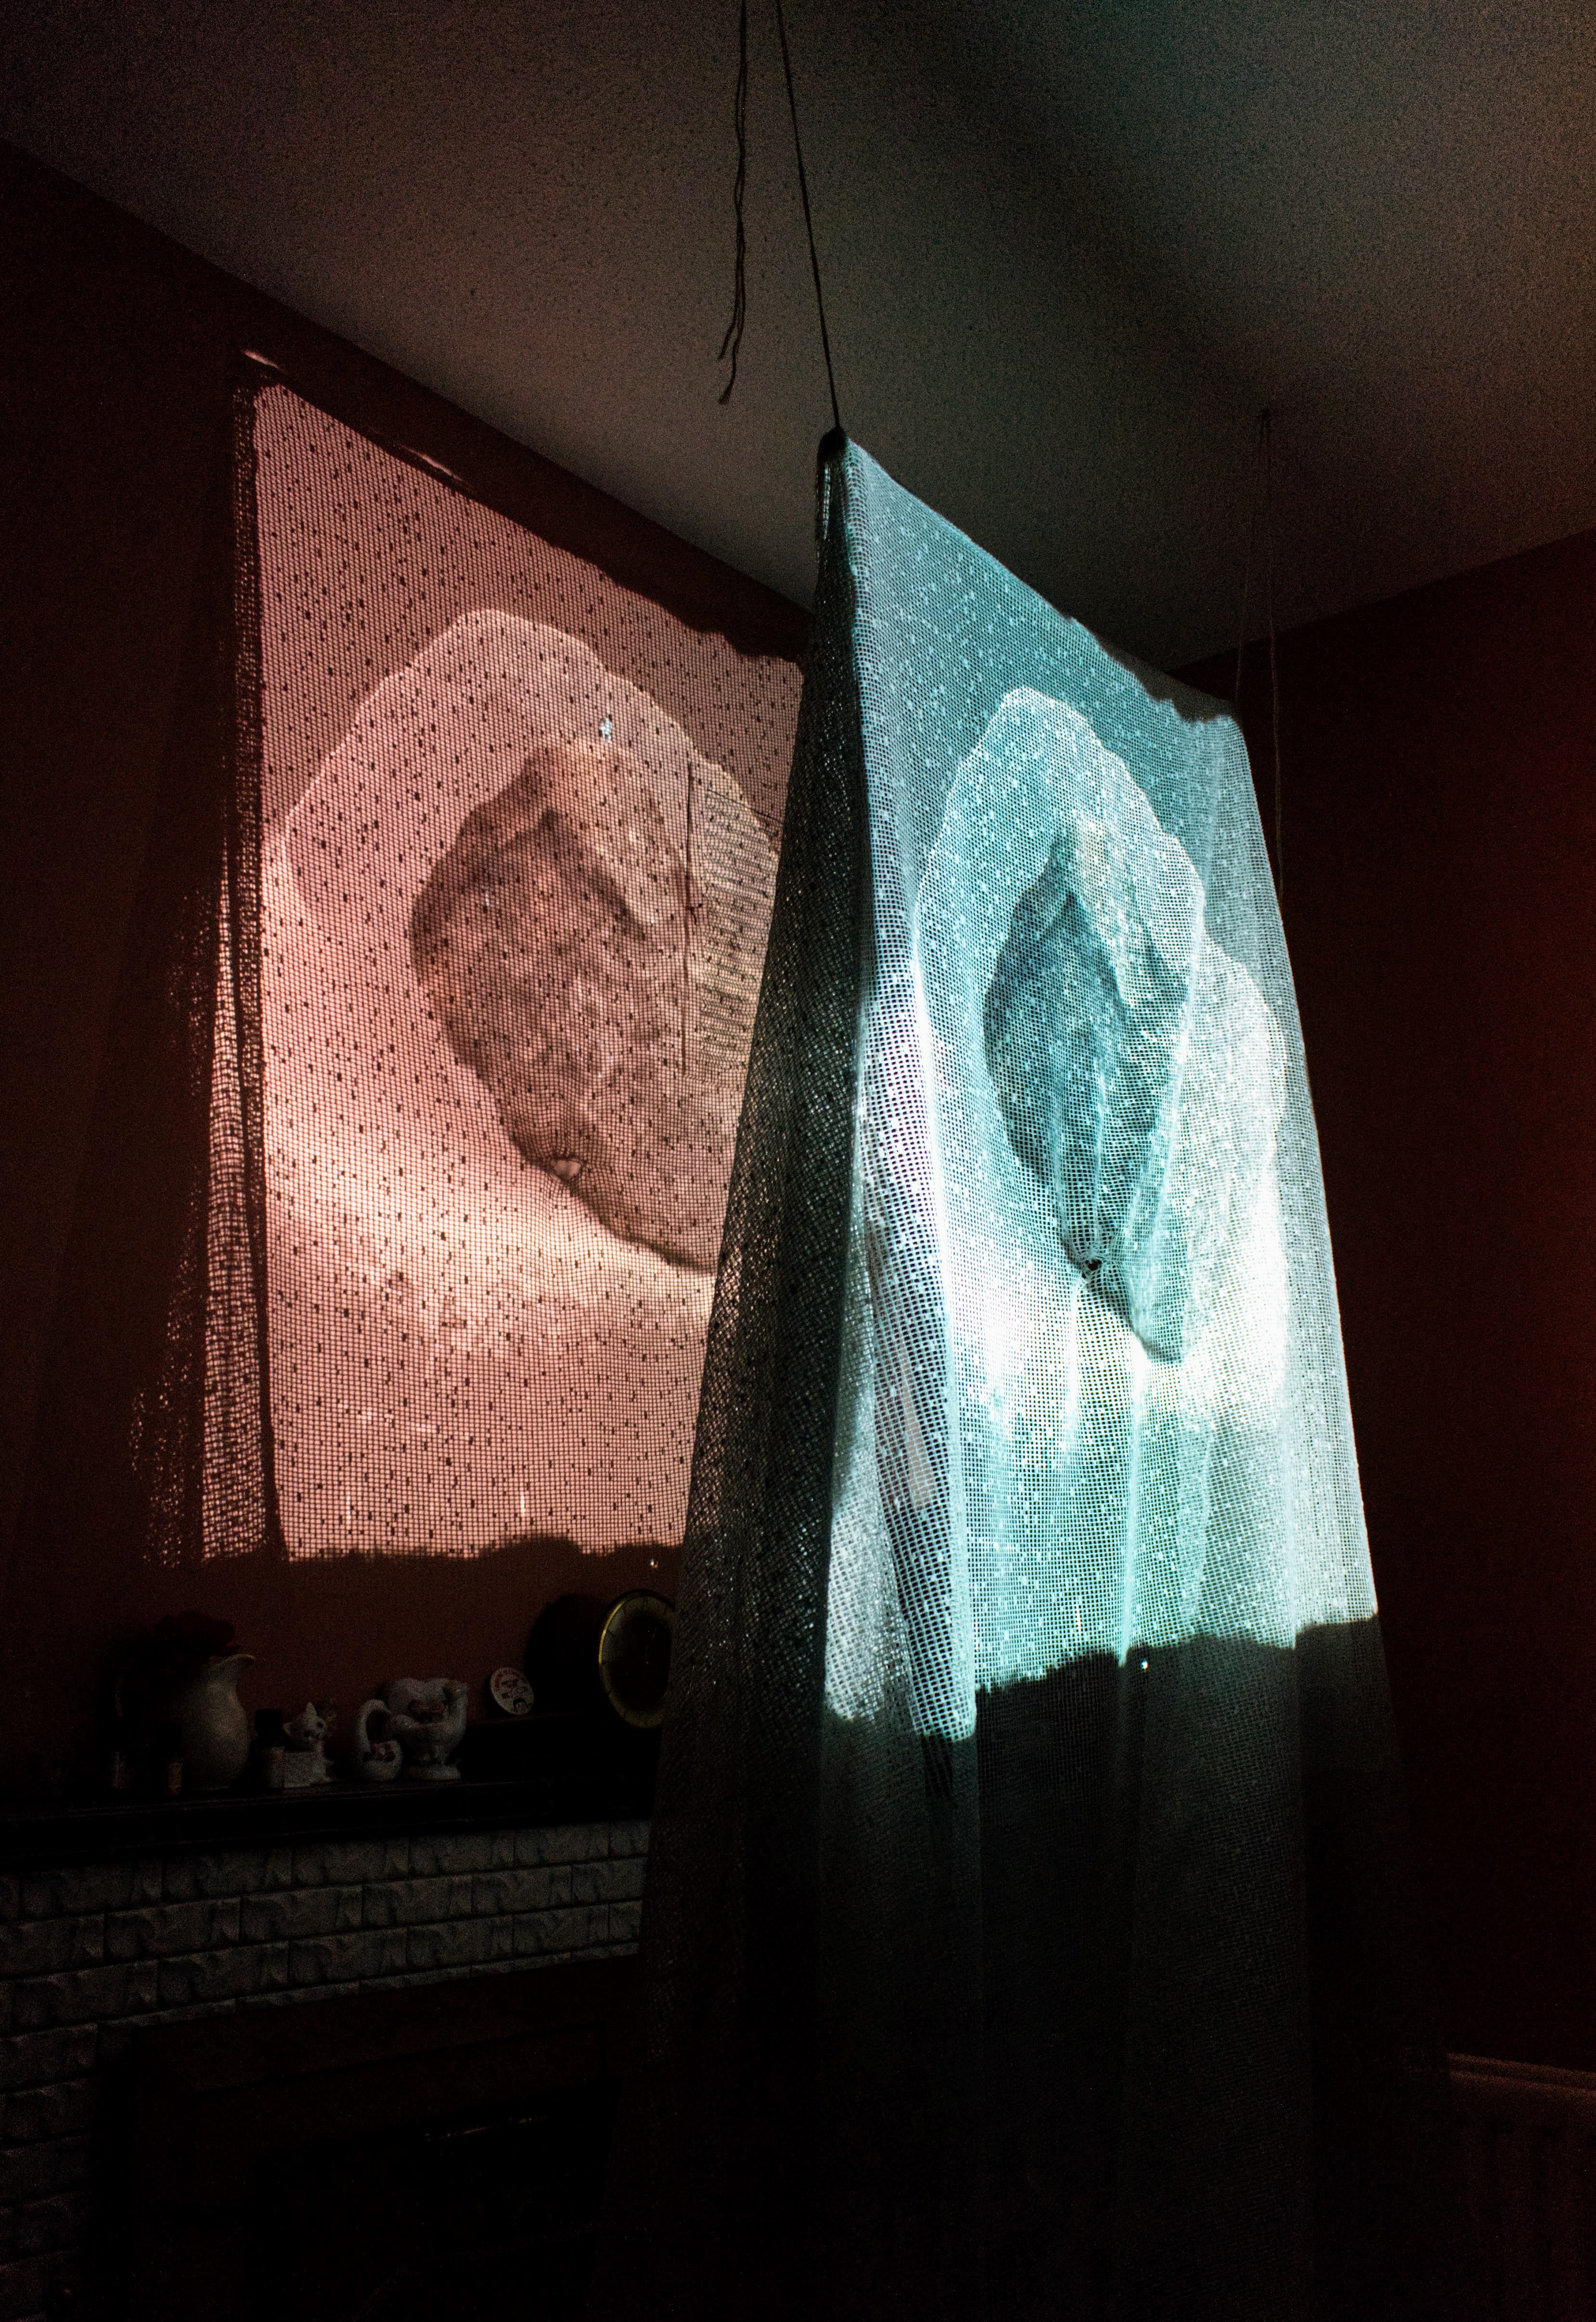 A still from a video of algorithimically generated stones projected onto a lace mesh